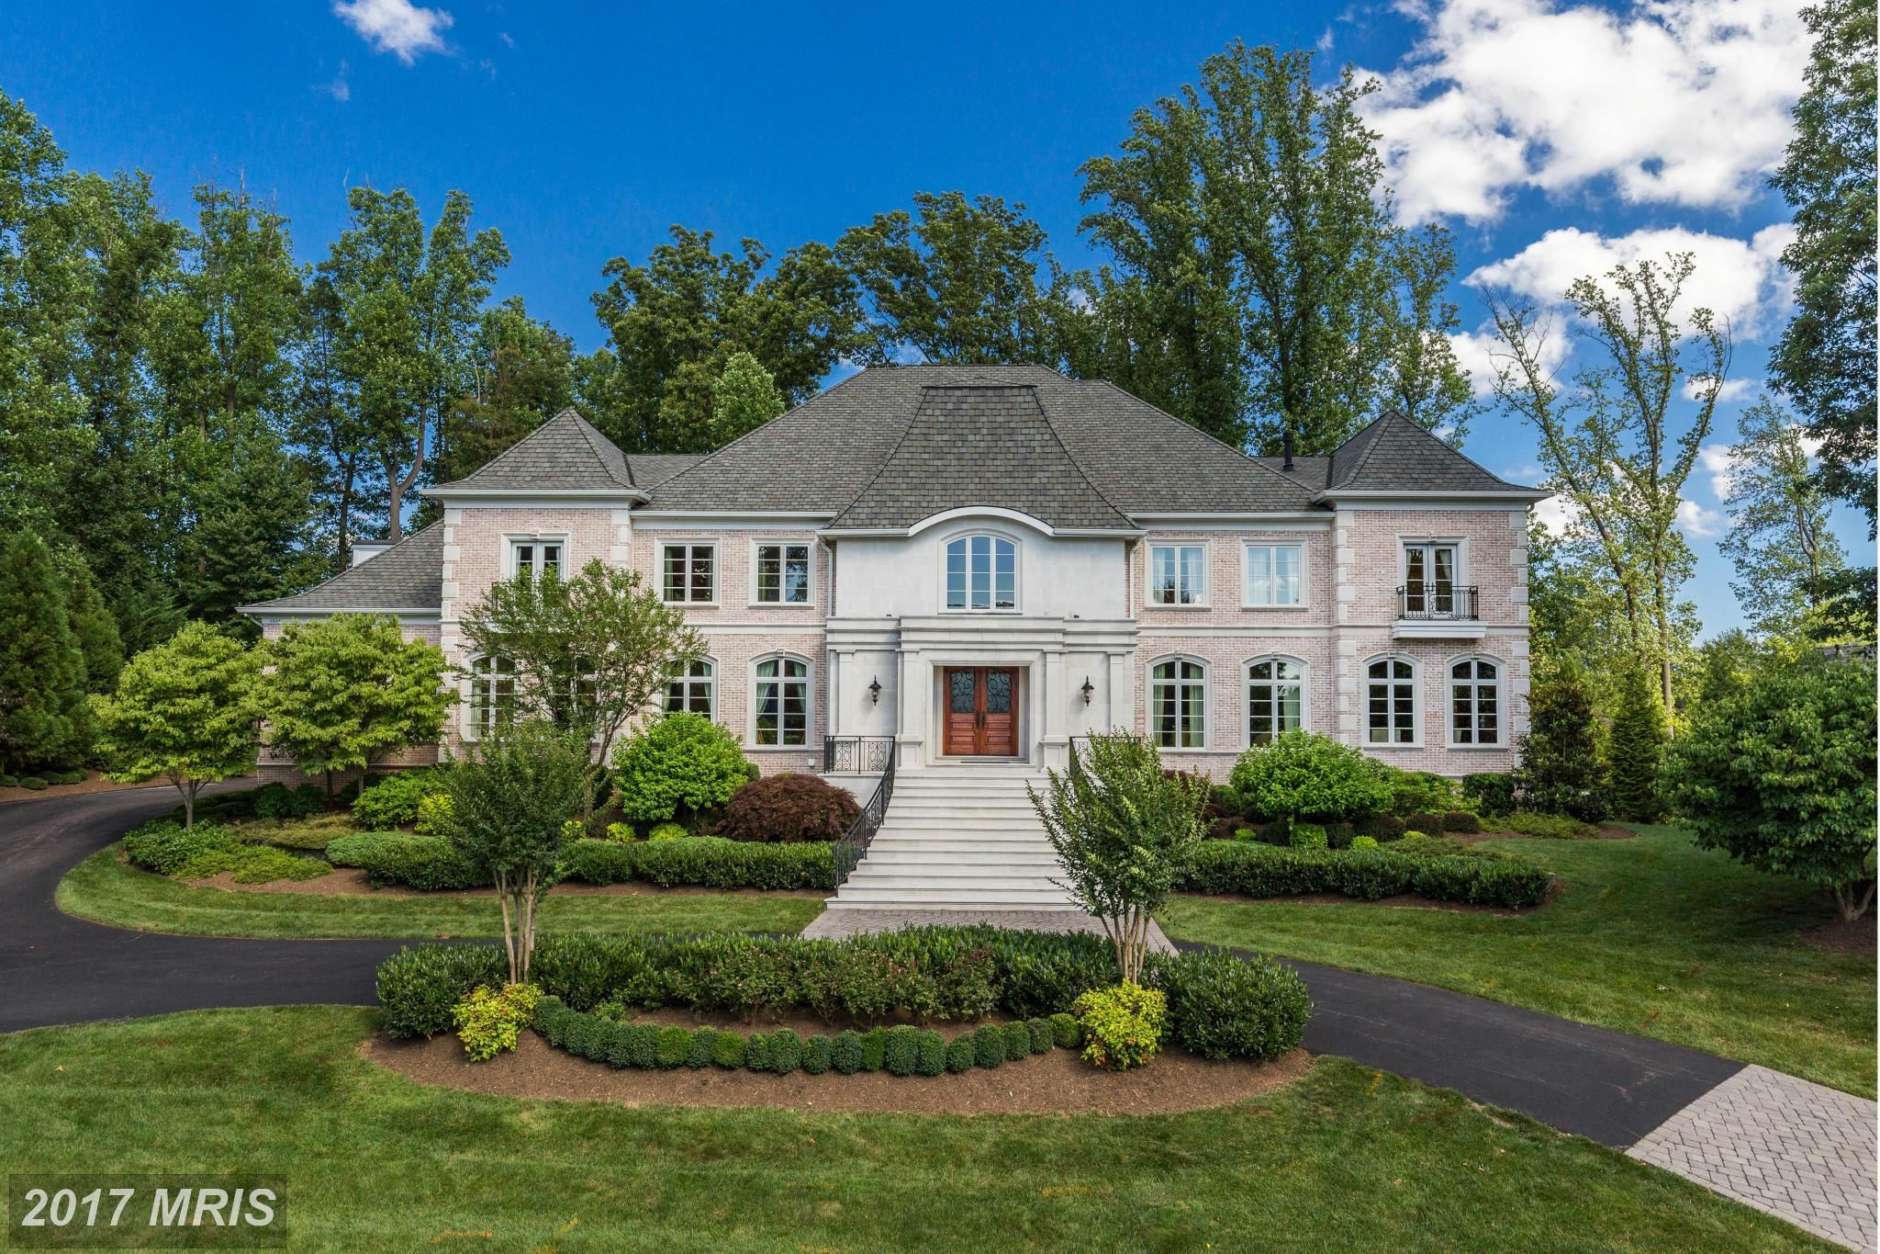 7. $4,025,000

7805 Meritage Lane; McLean, Va.

Built in 2006, this house has eight full baths, 2 half baths and seven bedrooms. (Courtesy MRIS, a Bright MLS)